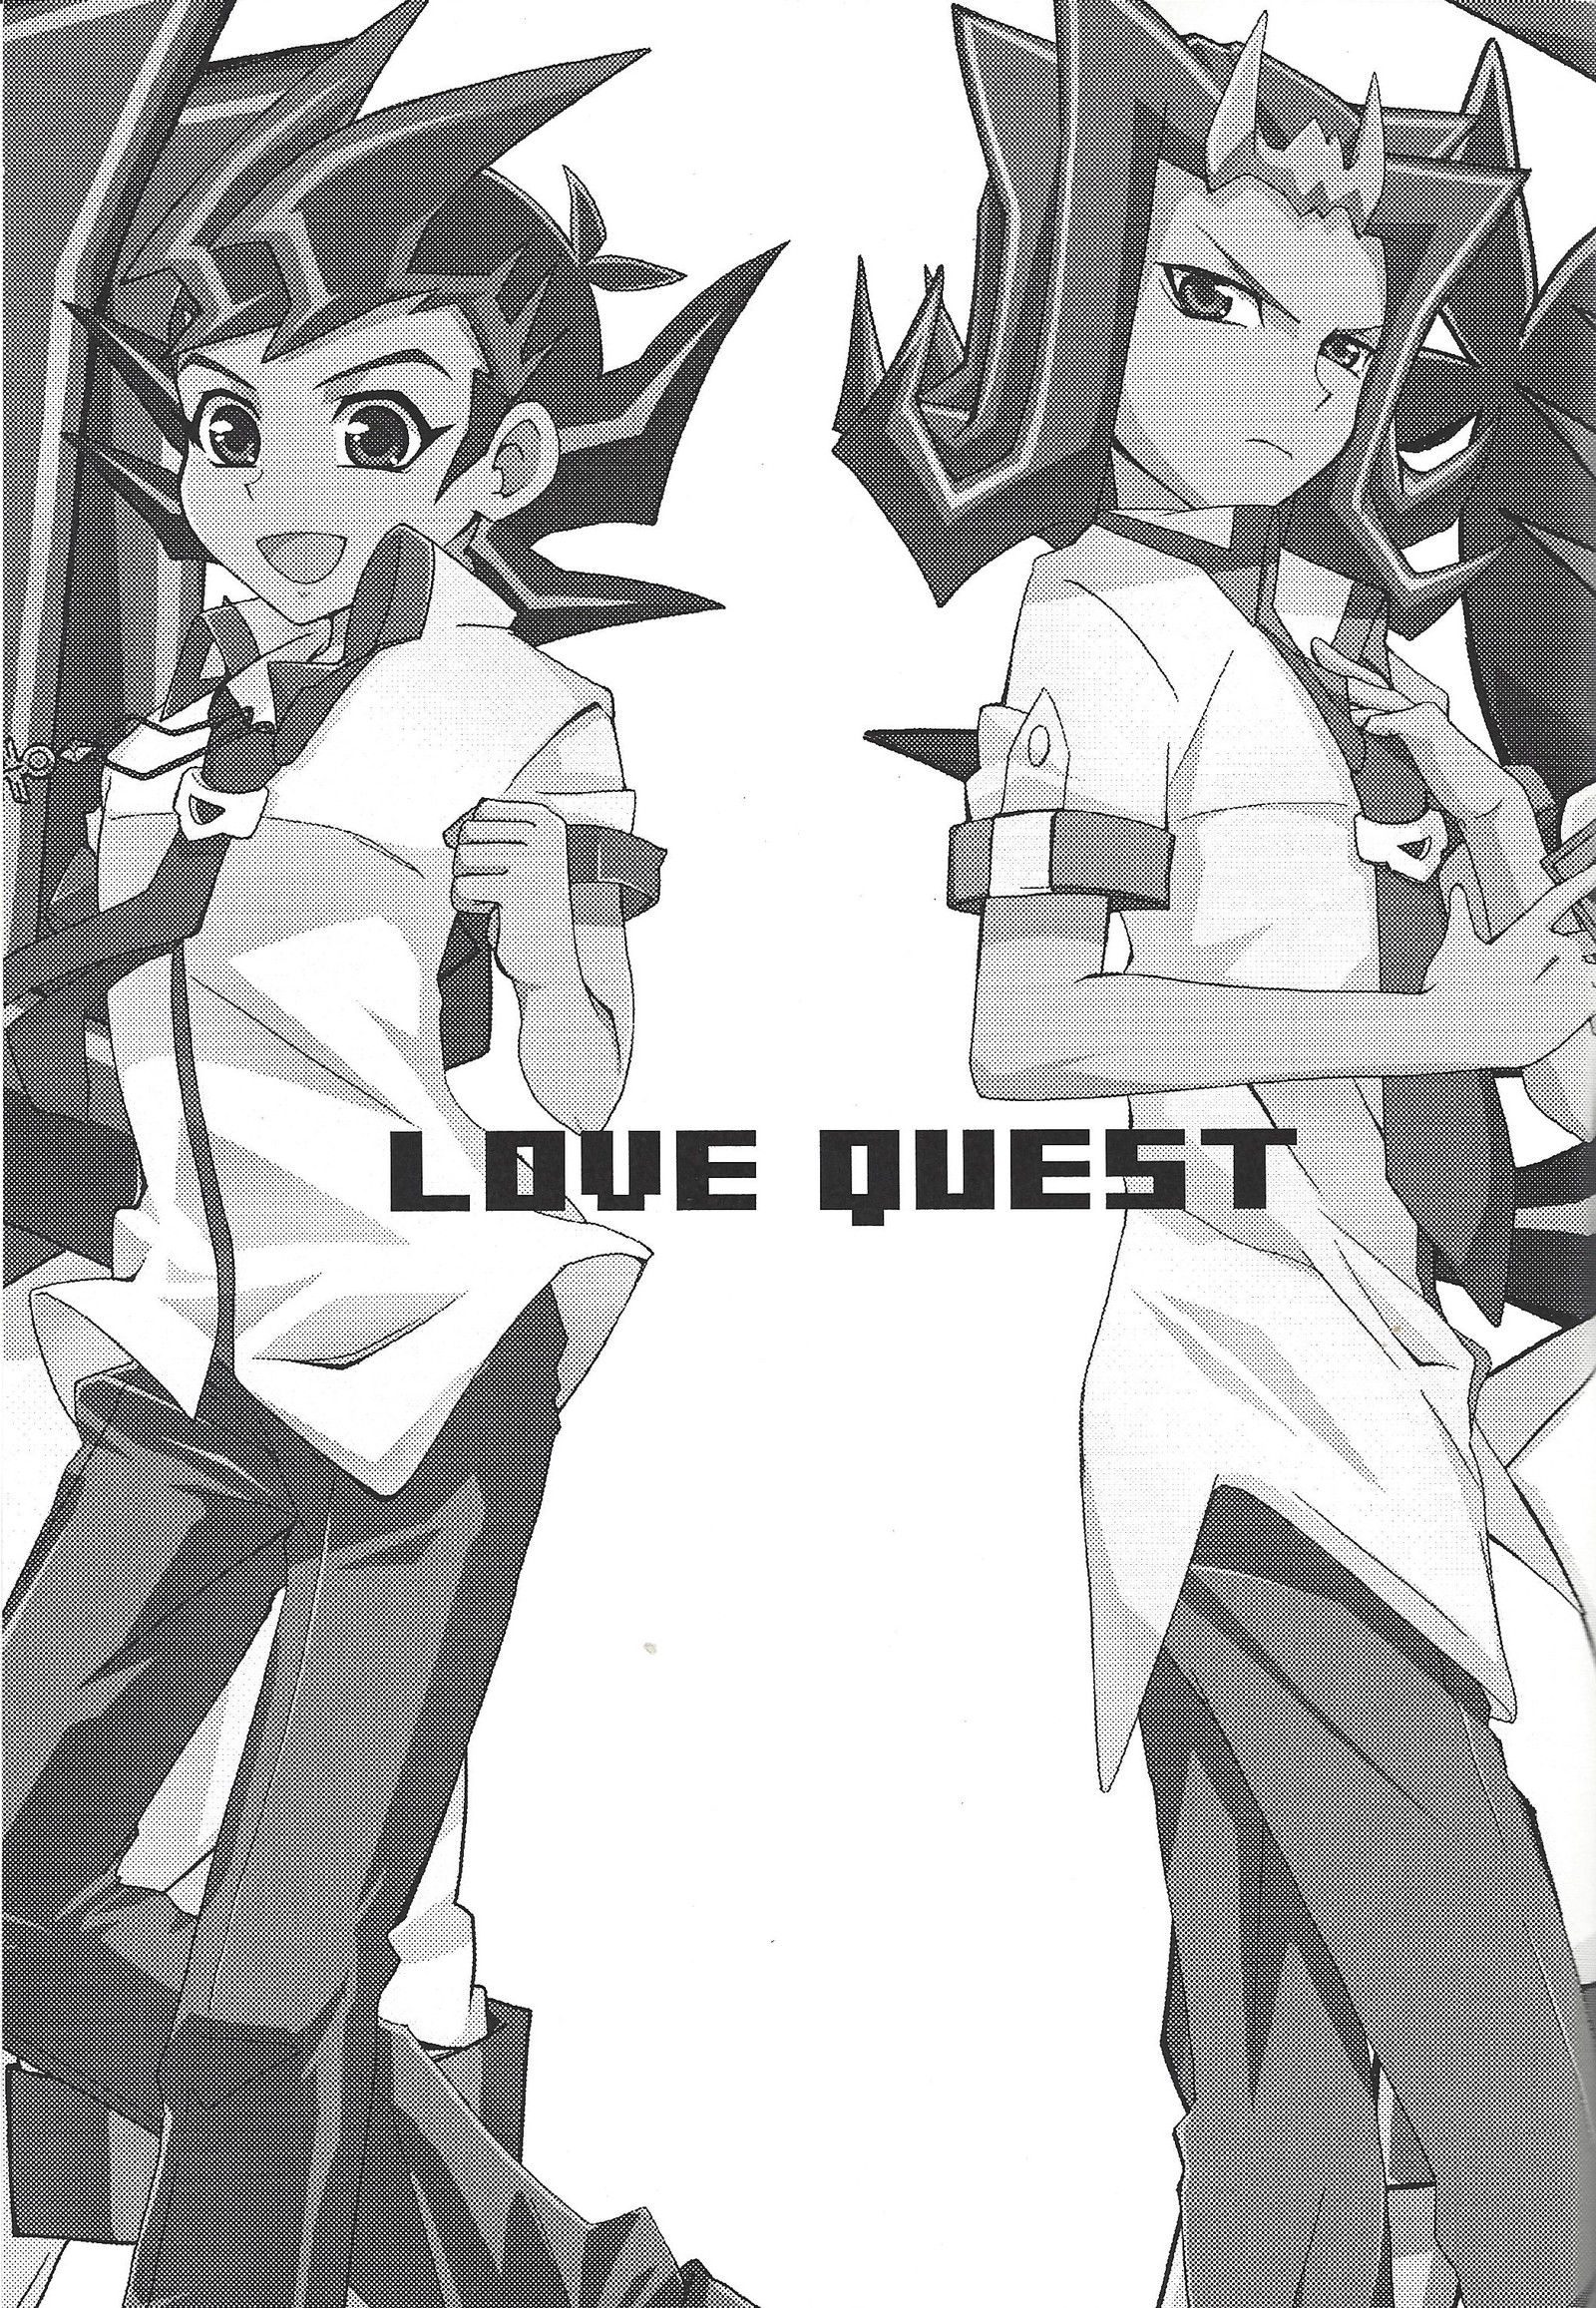 LoveQuest